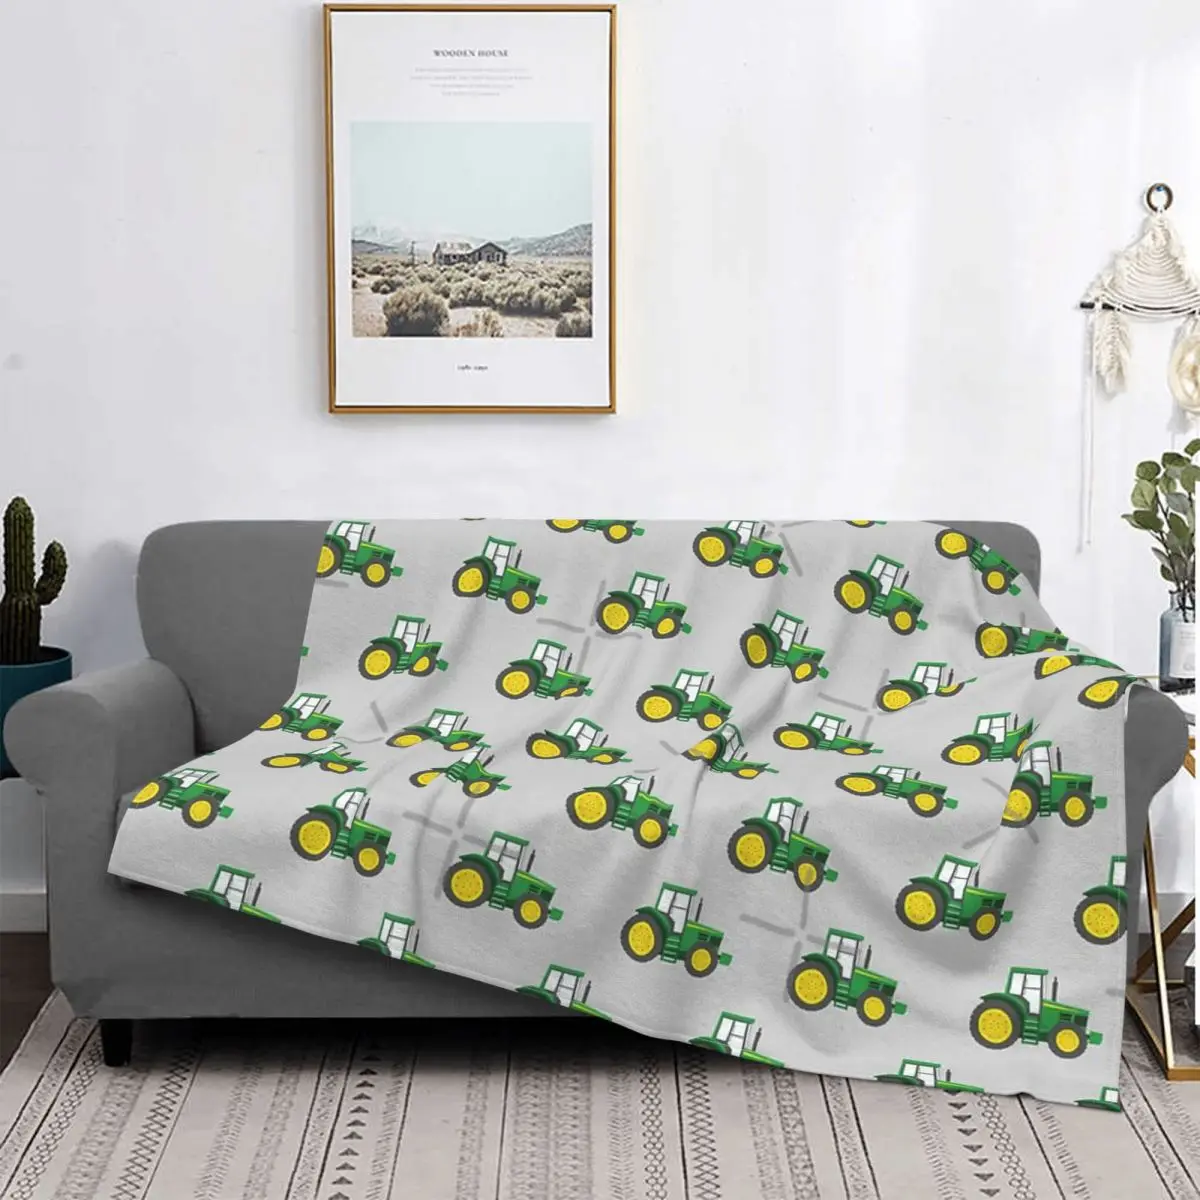 

Green Tractors On Grey - Farming - Farm Themed Throw Blanket Bohemian Knitted Plaid Blanket Gown Sofa Bed Comforter